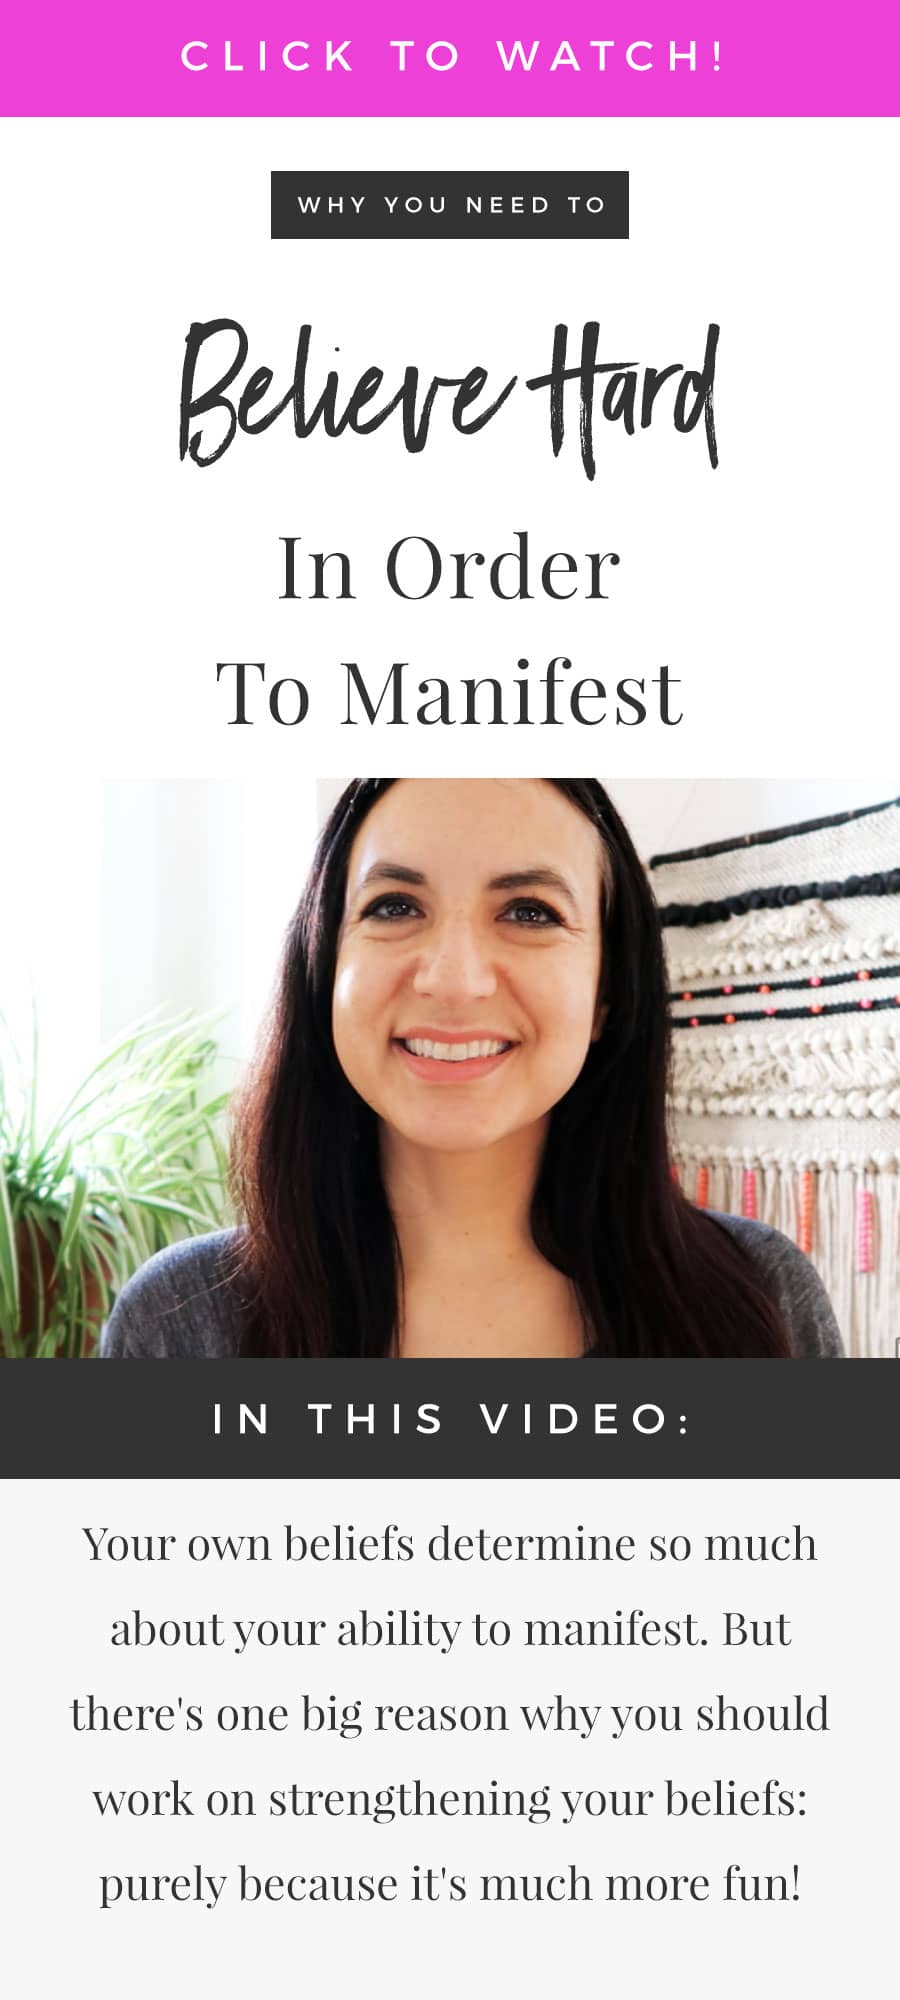 Why You Need To Believe Hard In Order To Manifest